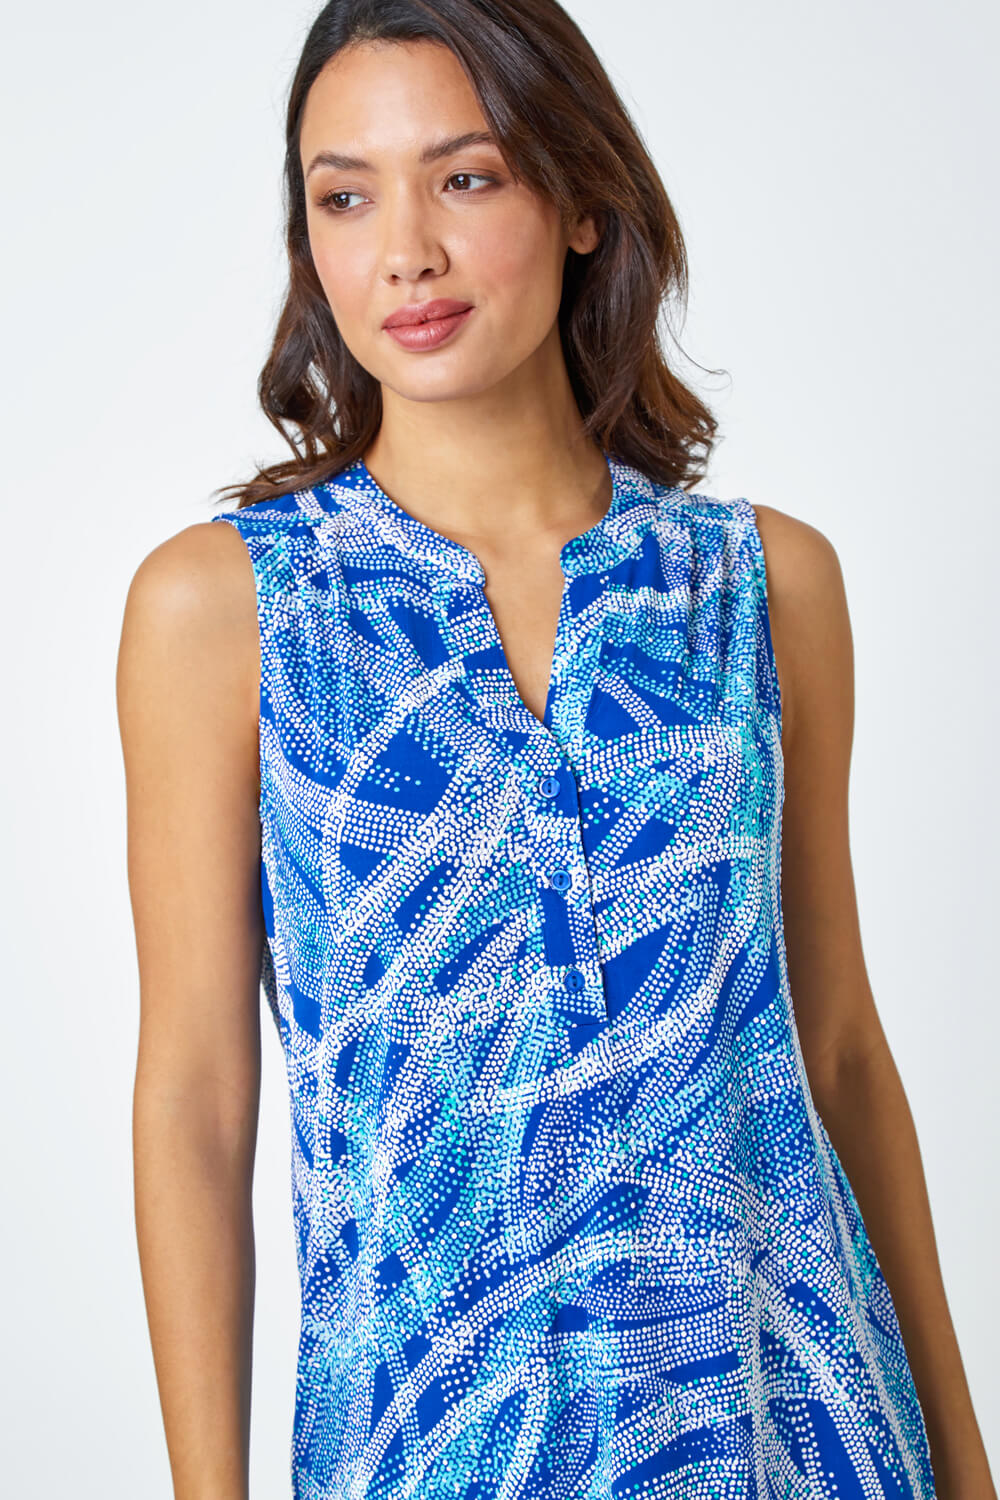 Blue Textured Spot Print Sleeveless Stretch Top, Image 4 of 5